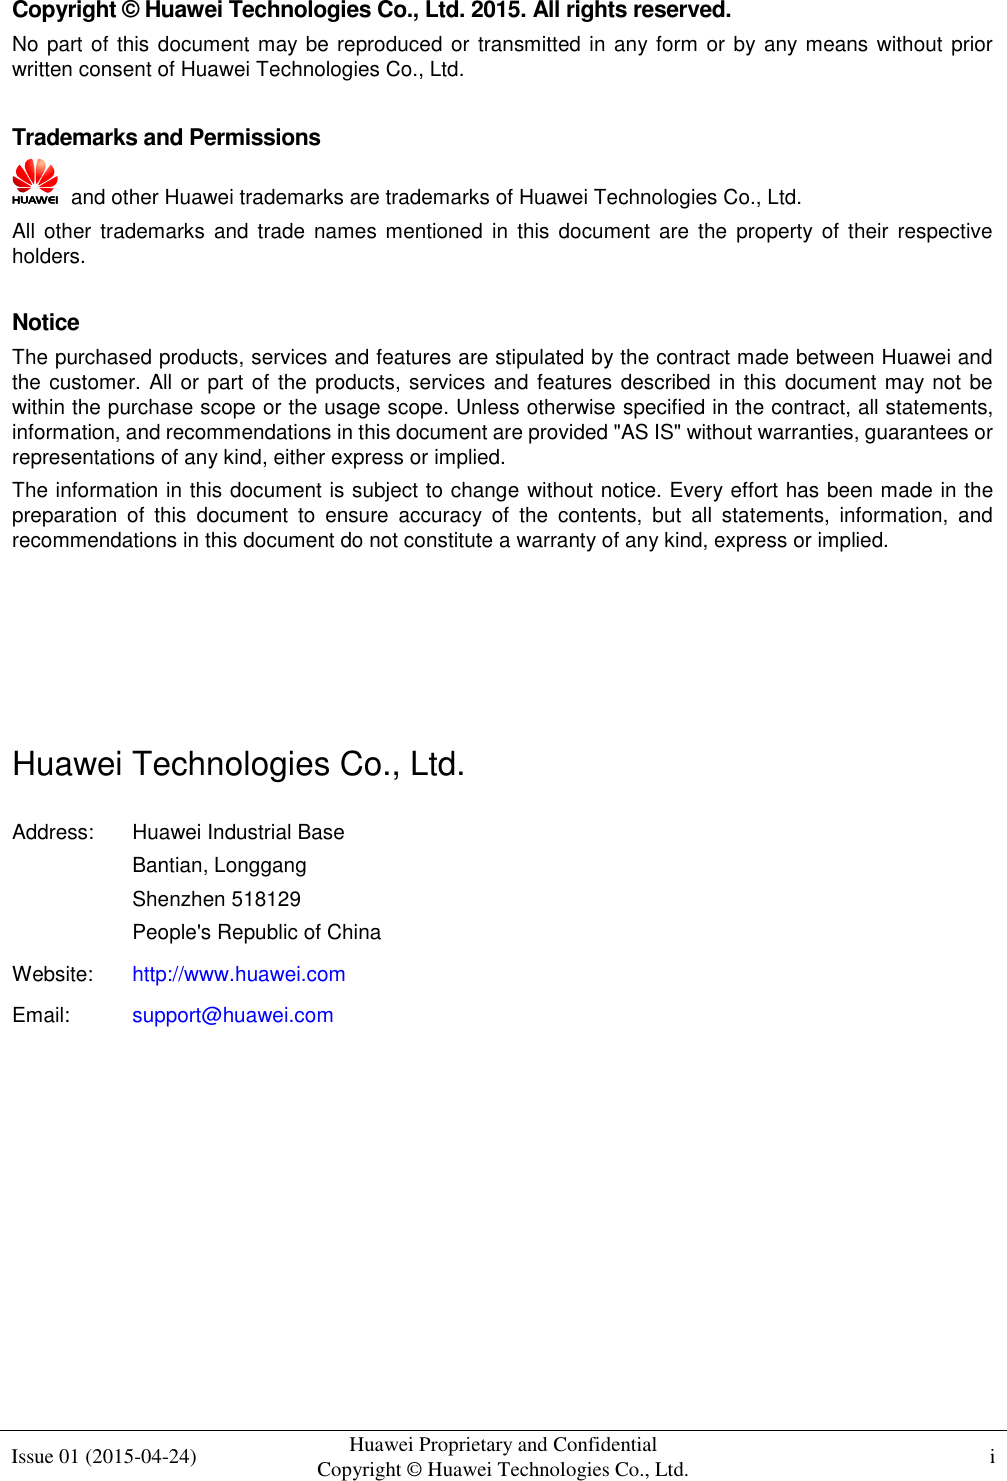  Issue 01 (2015-04-24) Huawei Proprietary and Confidential                                     Copyright © Huawei Technologies Co., Ltd. i    Copyright © Huawei Technologies Co., Ltd. 2015. All rights reserved. No part of this document may be reproduced or transmitted in any form or by any means without prior written consent of Huawei Technologies Co., Ltd.  Trademarks and Permissions   and other Huawei trademarks are trademarks of Huawei Technologies Co., Ltd. All other trademarks  and trade names  mentioned in  this document  are  the  property  of  their respective holders.  Notice The purchased products, services and features are stipulated by the contract made between Huawei and the customer.  All or part of the products, services and features described in this document may not be within the purchase scope or the usage scope. Unless otherwise specified in the contract, all statements, information, and recommendations in this document are provided &quot;AS IS&quot; without warranties, guarantees or representations of any kind, either express or implied. The information in this document is subject to change without notice. Every effort has been made in the preparation  of  this  document  to  ensure  accuracy  of  the  contents,  but  all  statements,  information,  and recommendations in this document do not constitute a warranty of any kind, express or implied.     Huawei Technologies Co., Ltd. Address: Huawei Industrial Base Bantian, Longgang Shenzhen 518129 People&apos;s Republic of China Website: http://www.huawei.com Email: support@huawei.com          